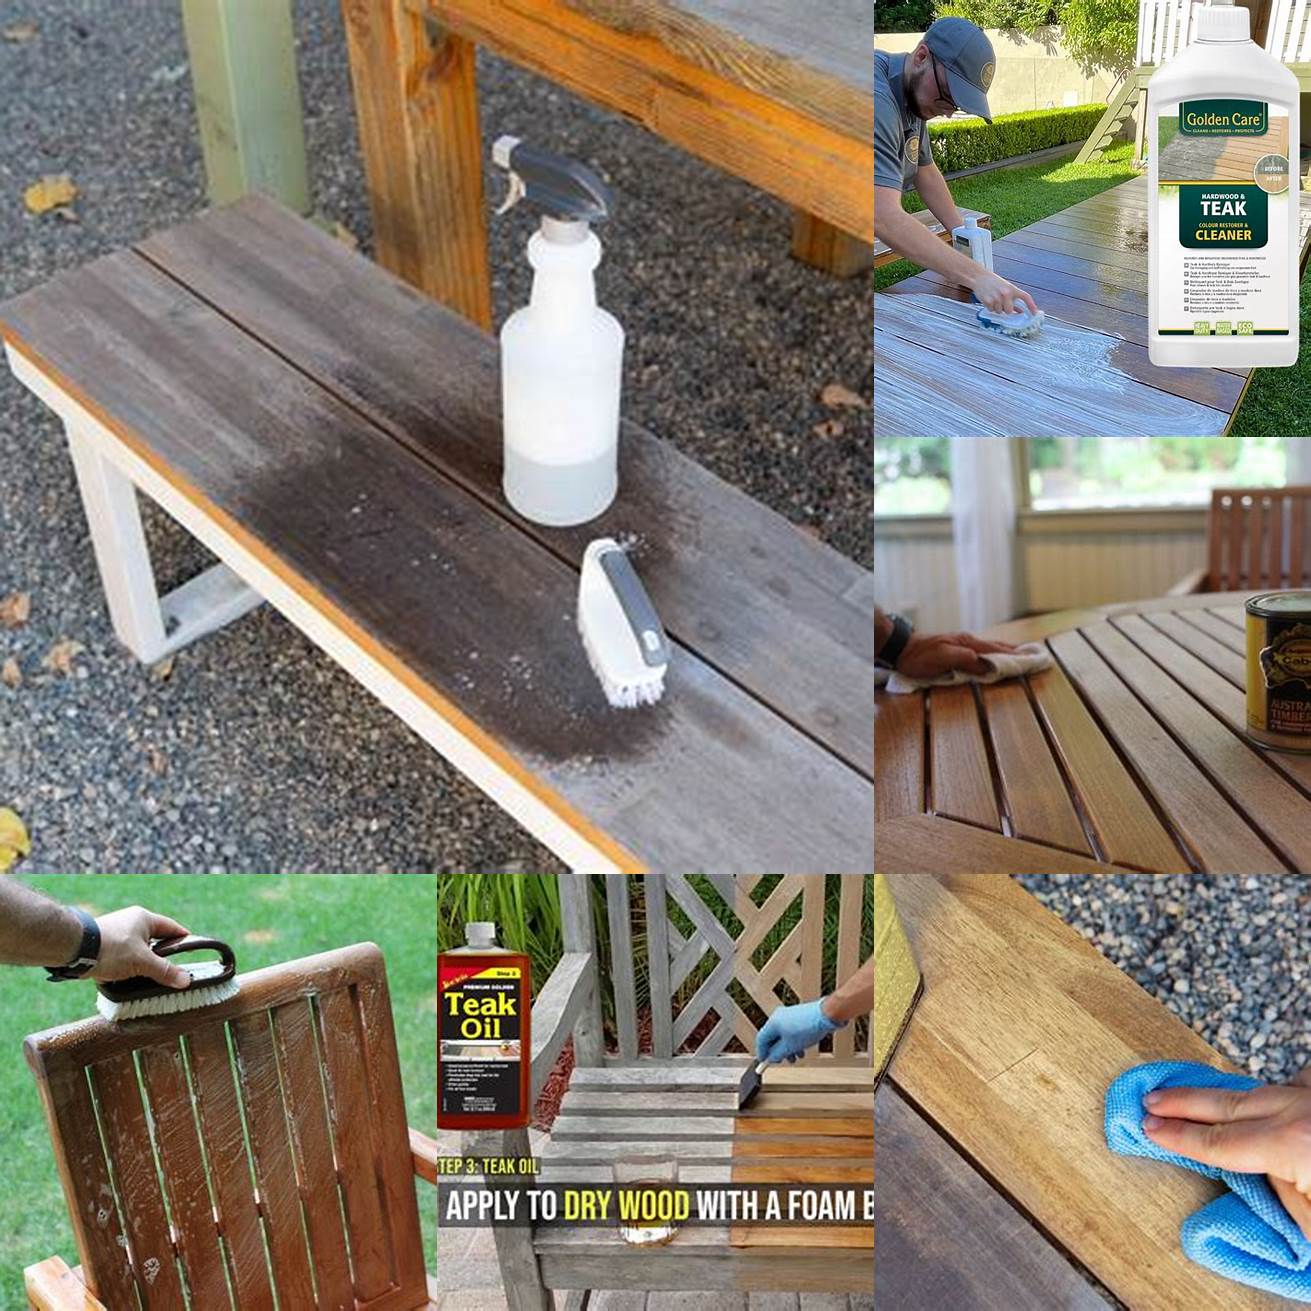 Cleaning Teak Furniture with Mineral Spirits